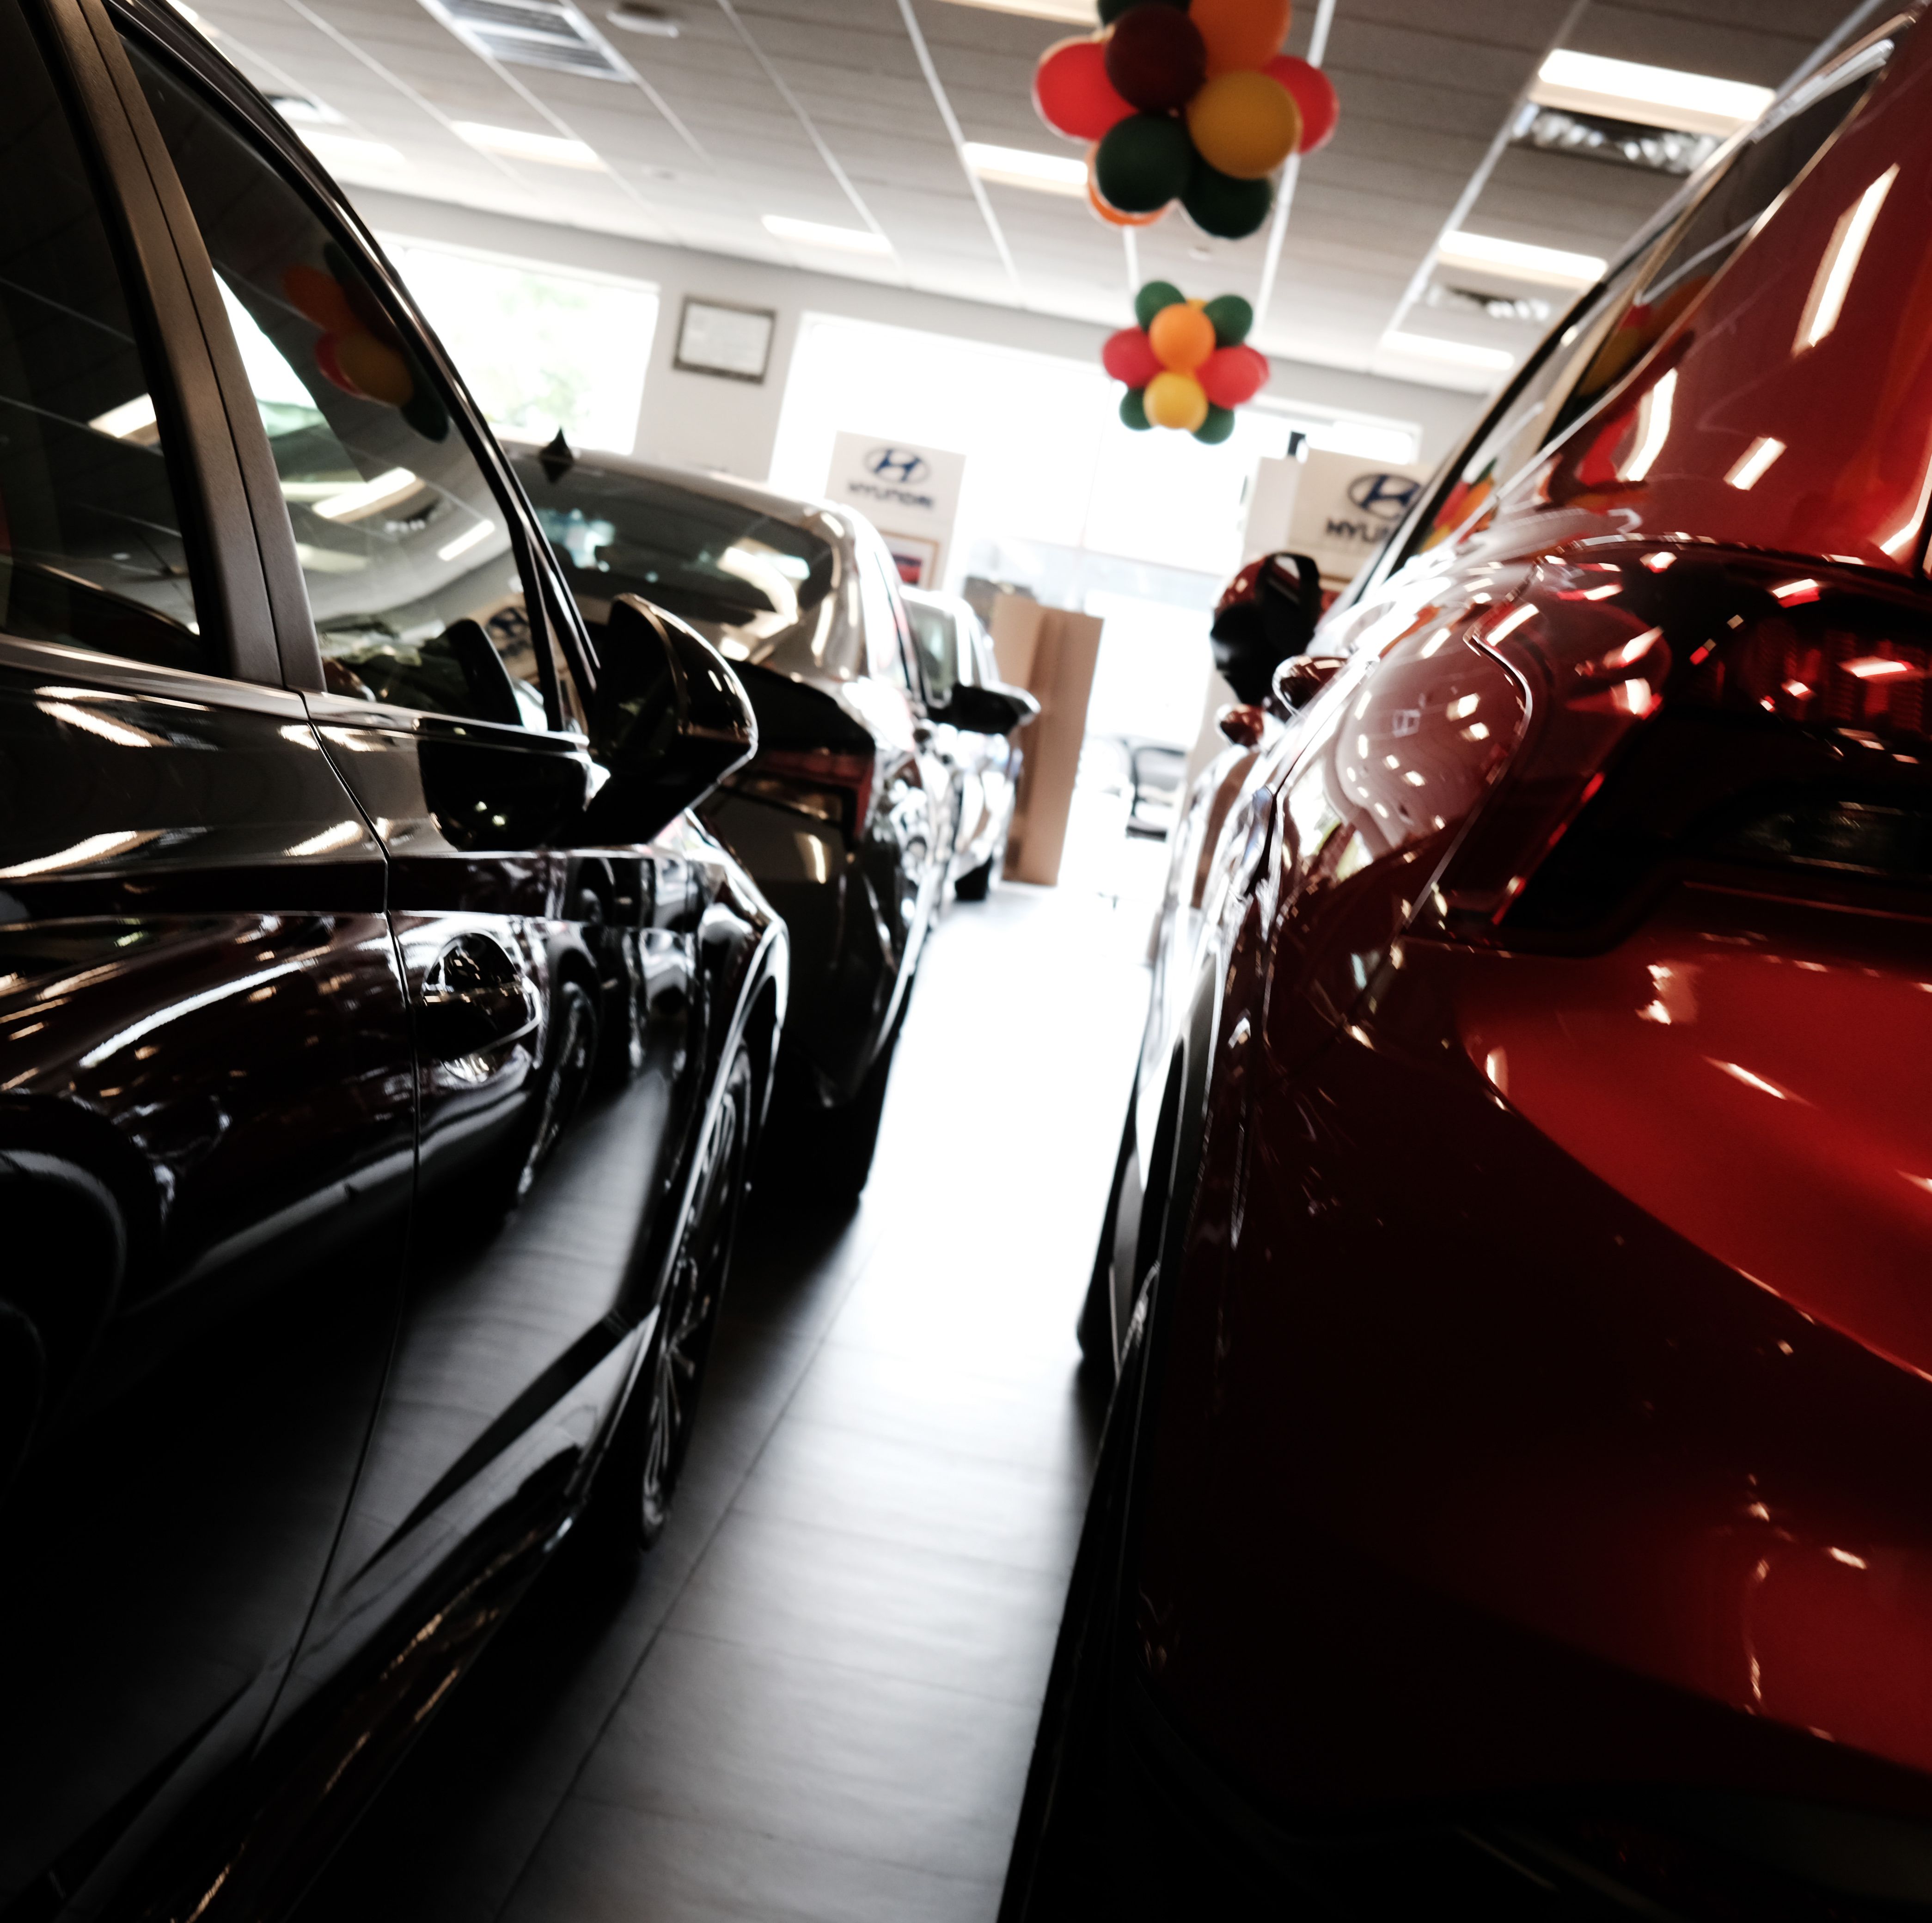 The Average Used Car Price Is Now More Than $27,500